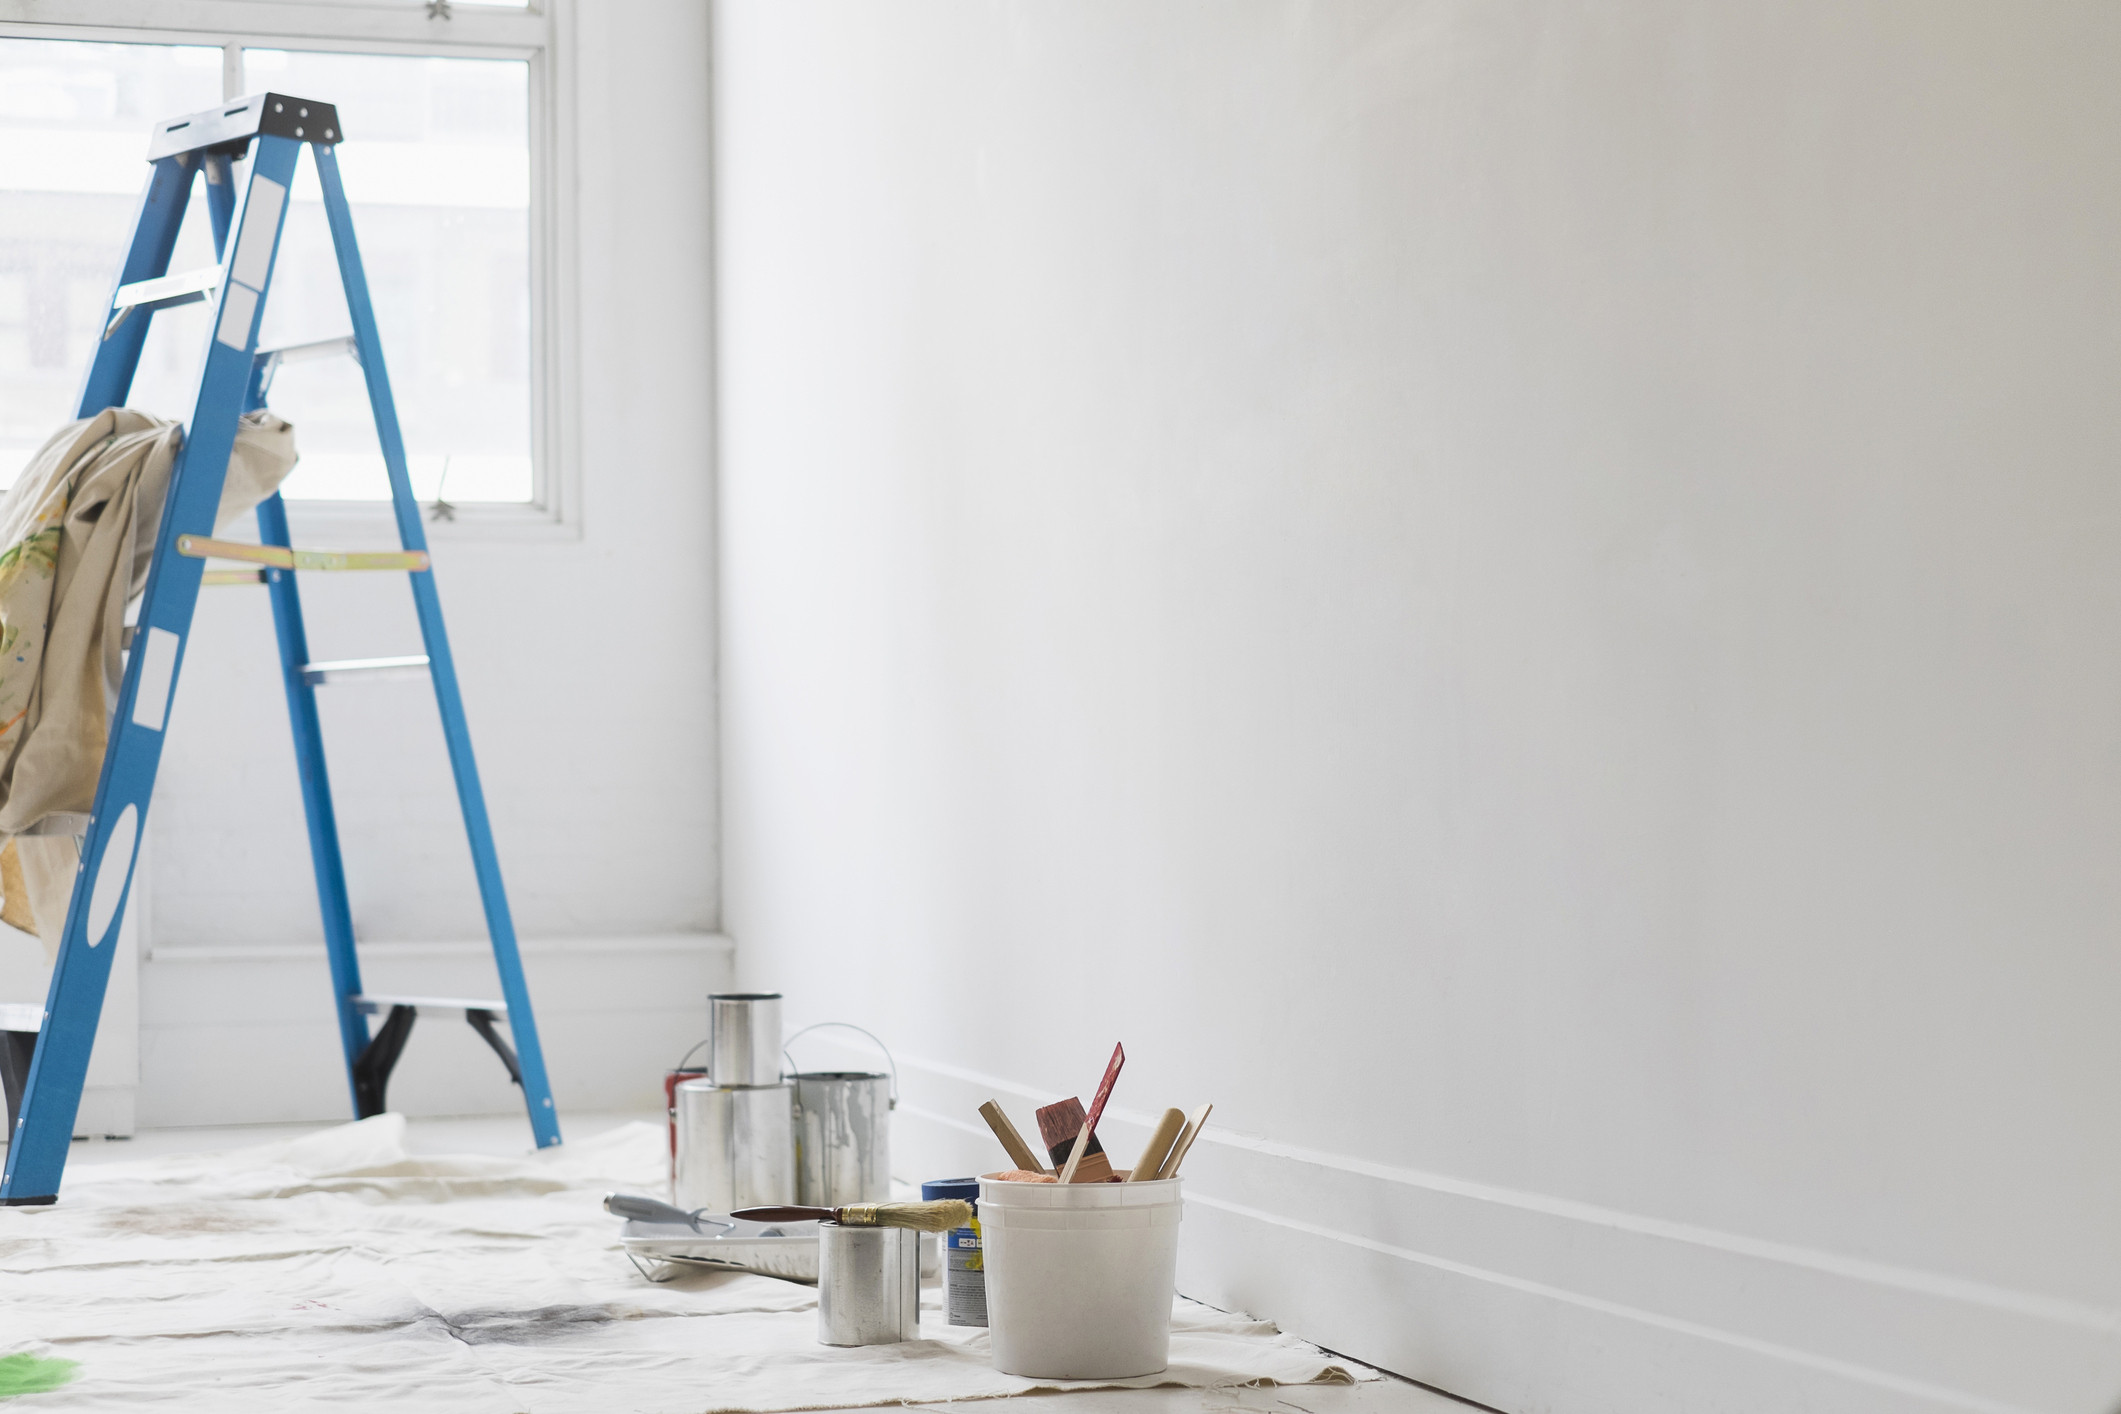 10 Must-Follow Tips for Staying Sane During a Home Reno